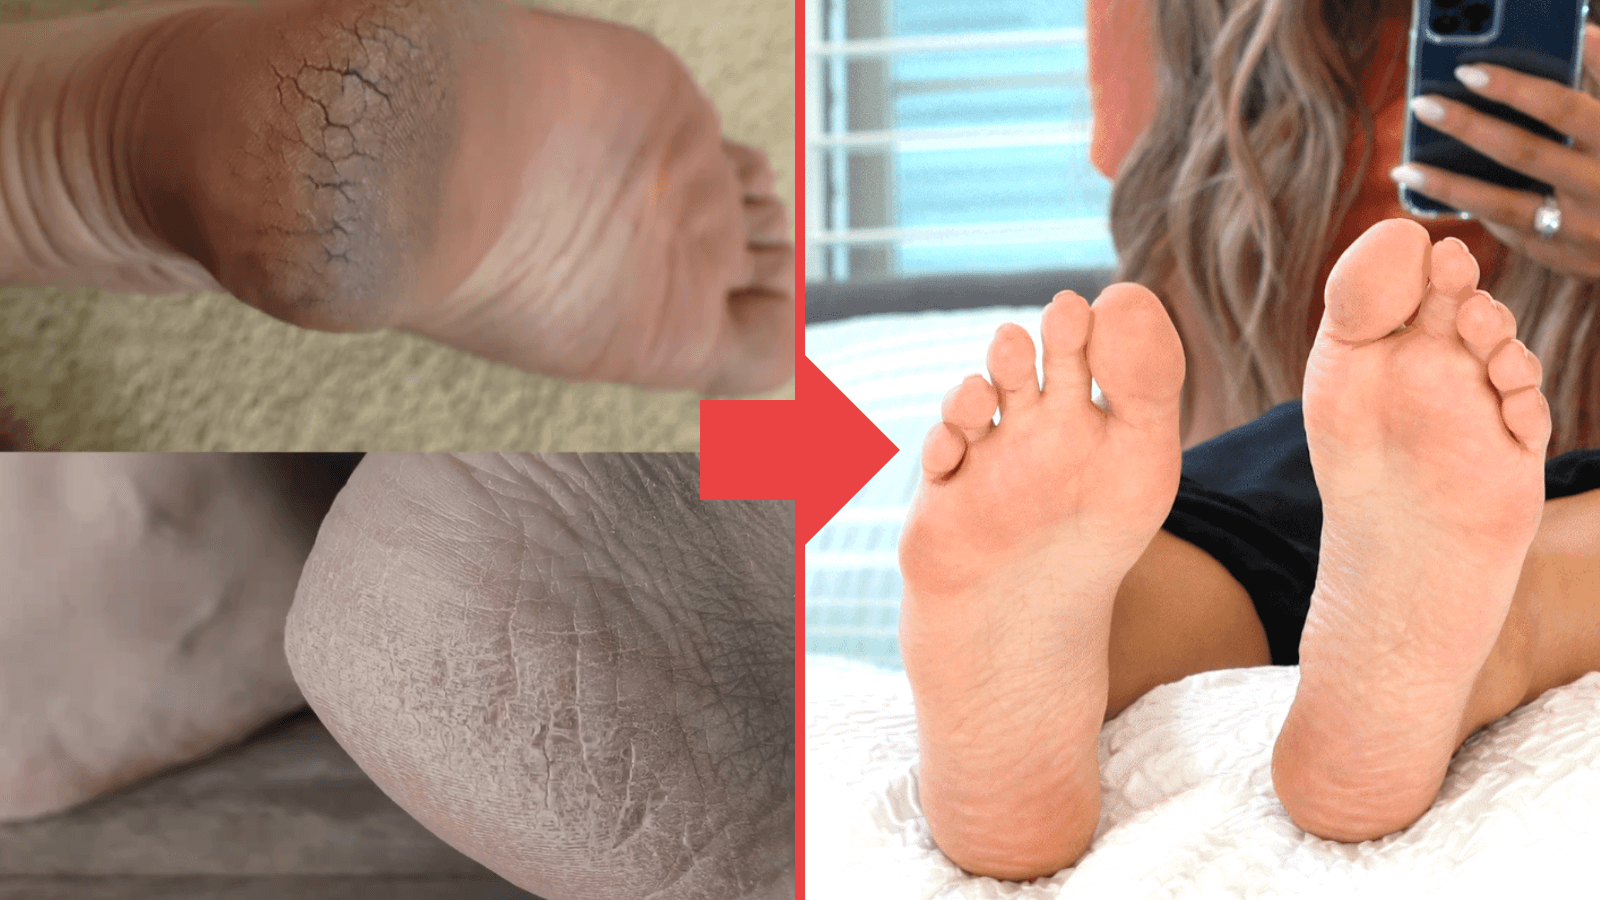 Here's How Anyone Can Turn Dry, Cracked, Unsightly Feet into Baby Soft GLOWING Feet in 1 Hour